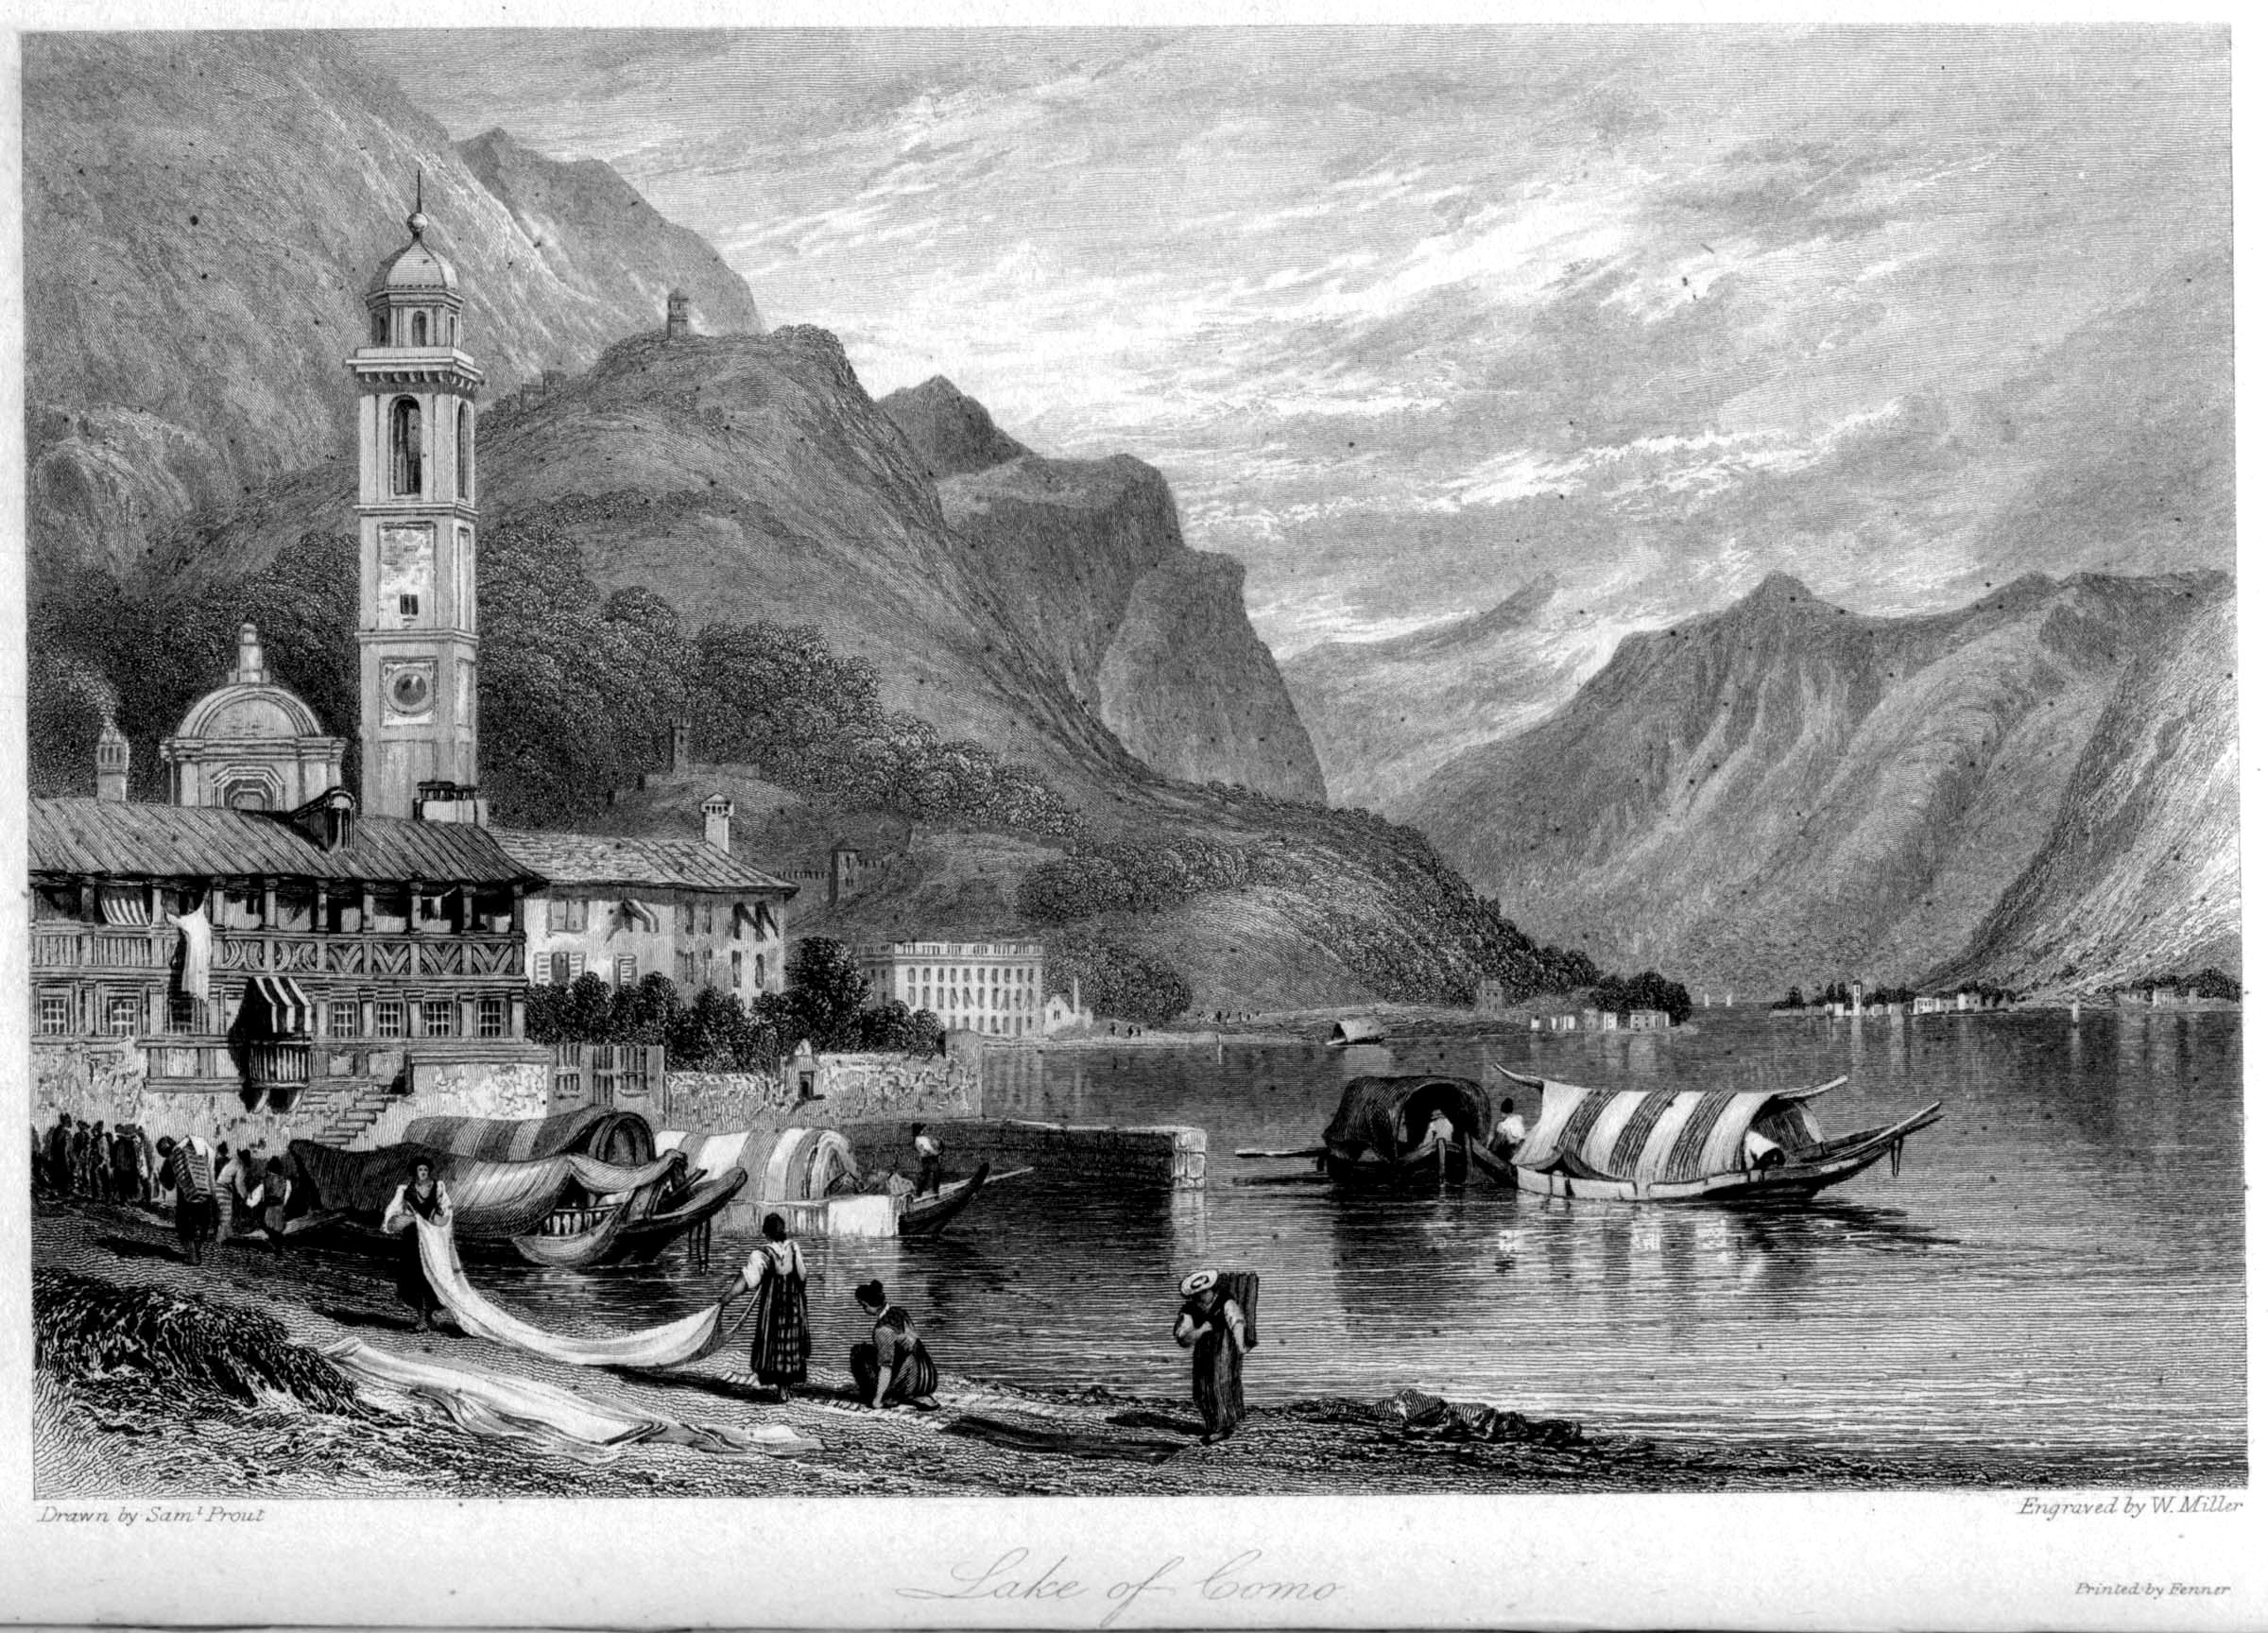 Lake_of_Como_engraving_by_William_Miller_after_S_Prout.jpg